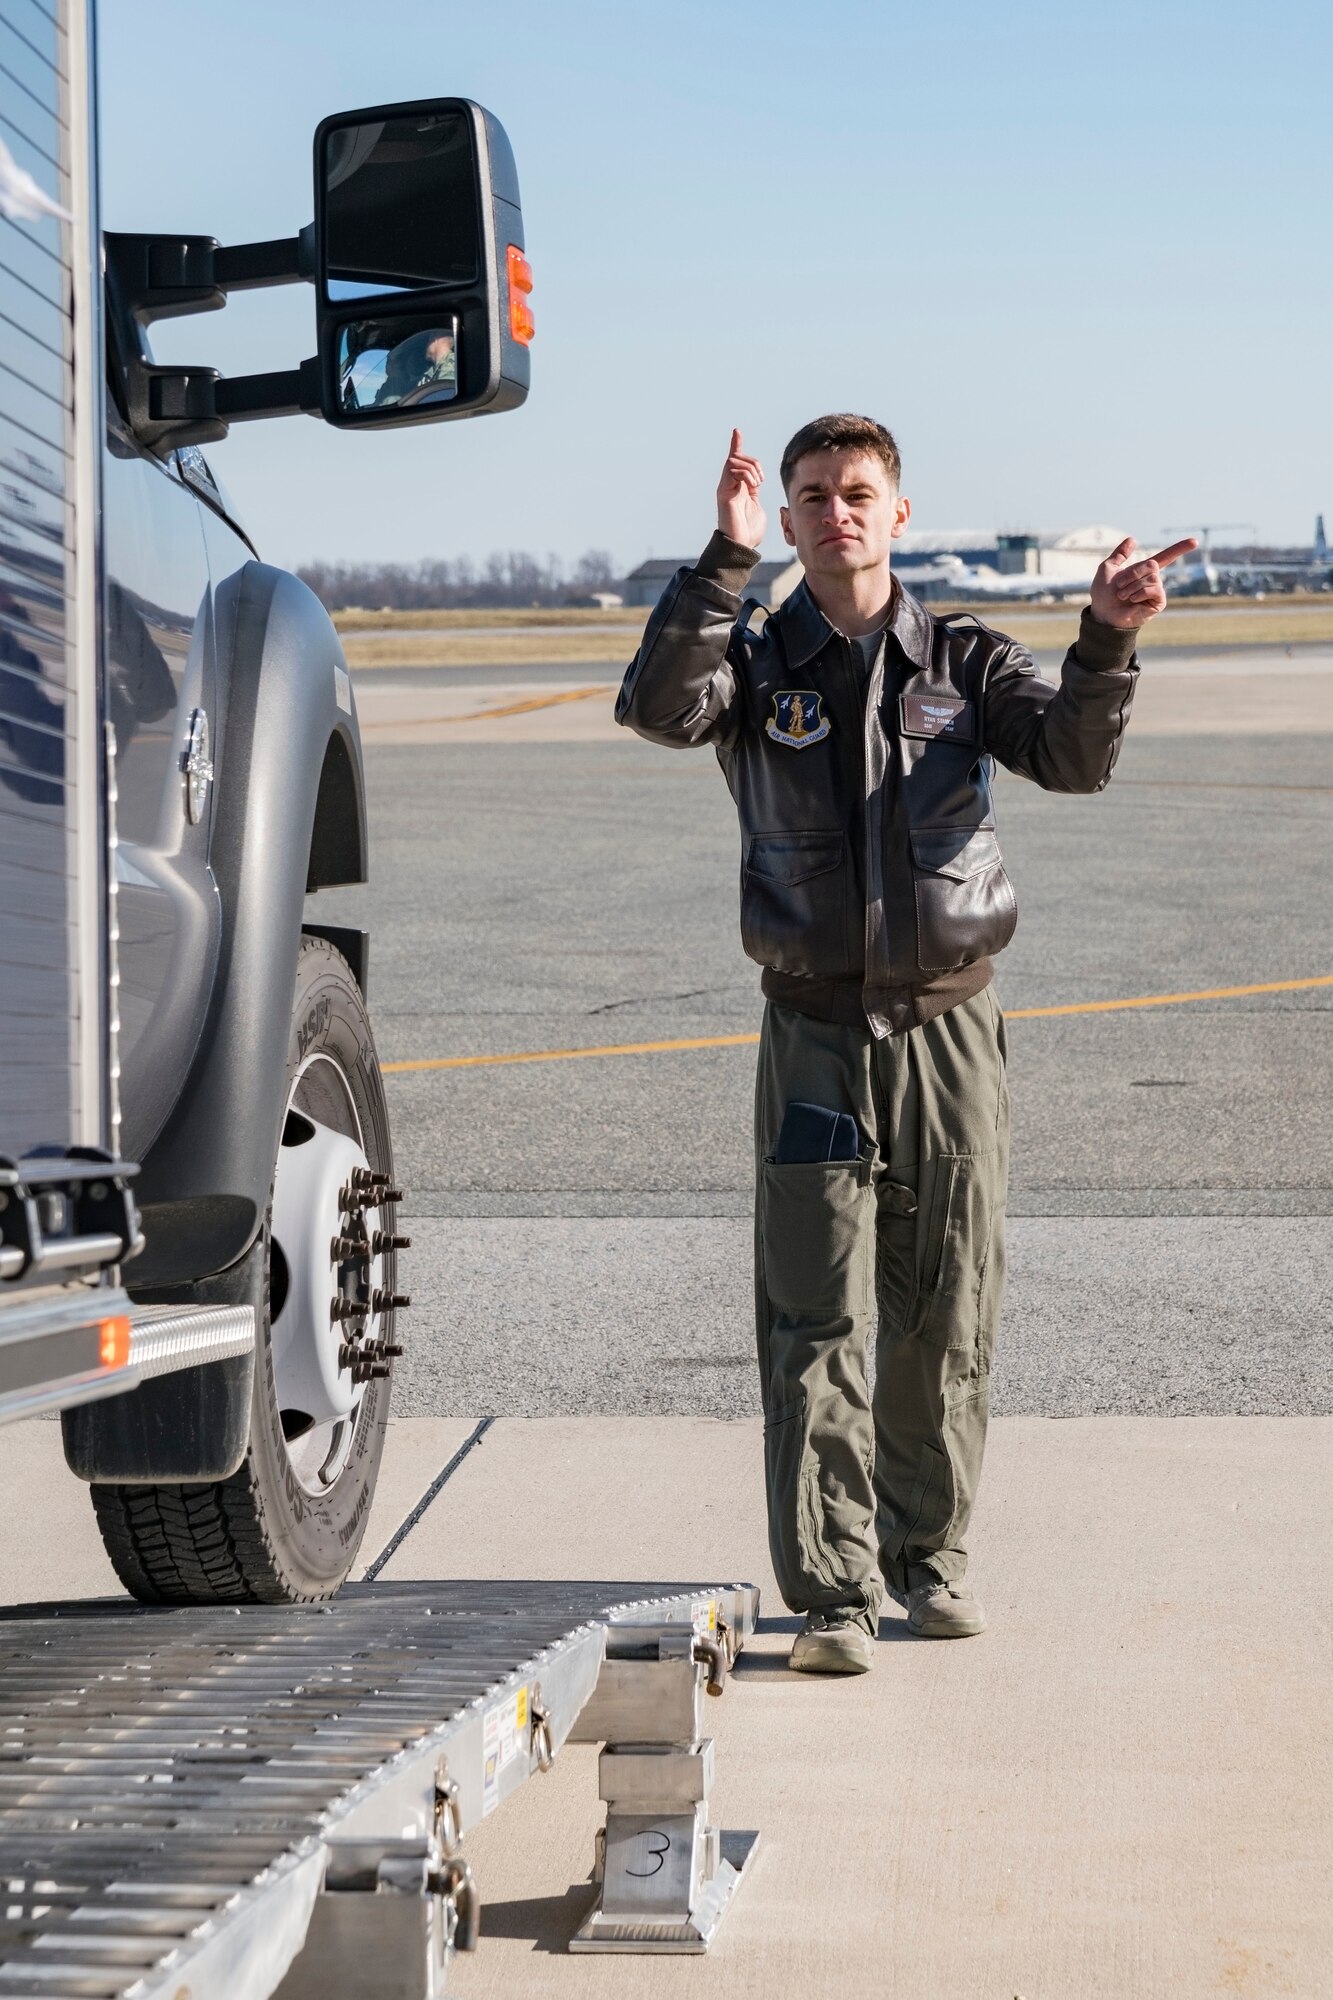 Staff Sgt. Ryan Stanich, 137th Airlift Squadron C-17 loadmaster, Stewart Air National Guard Base, Newburgh, N.Y., marshals a vehicle backing up on the DOMOPS Airlift Modular Approach Shoring Jan. 11, 2019, at Dover Air Force Base, Del. The Delaware National Guard's 31st Civil Support Team, Weapons of Mass Destruction headquartered in Smyrna, Del., were airlifted to Florida by a C-17 assigned to the 105th Airlift Wing, Stewart Air National Guard Base, Newburgh, N.Y., to support a large-scale training exercise Jan. 14-18. The 31st CST maintains the capability to mitigate the consequences of any WMD or Nuclear, Biological, and Chemical event, whether natural or man-made. They are experts in WMD effects and NBC defense operations. (U.S. Air Force photo by Roland Balik)